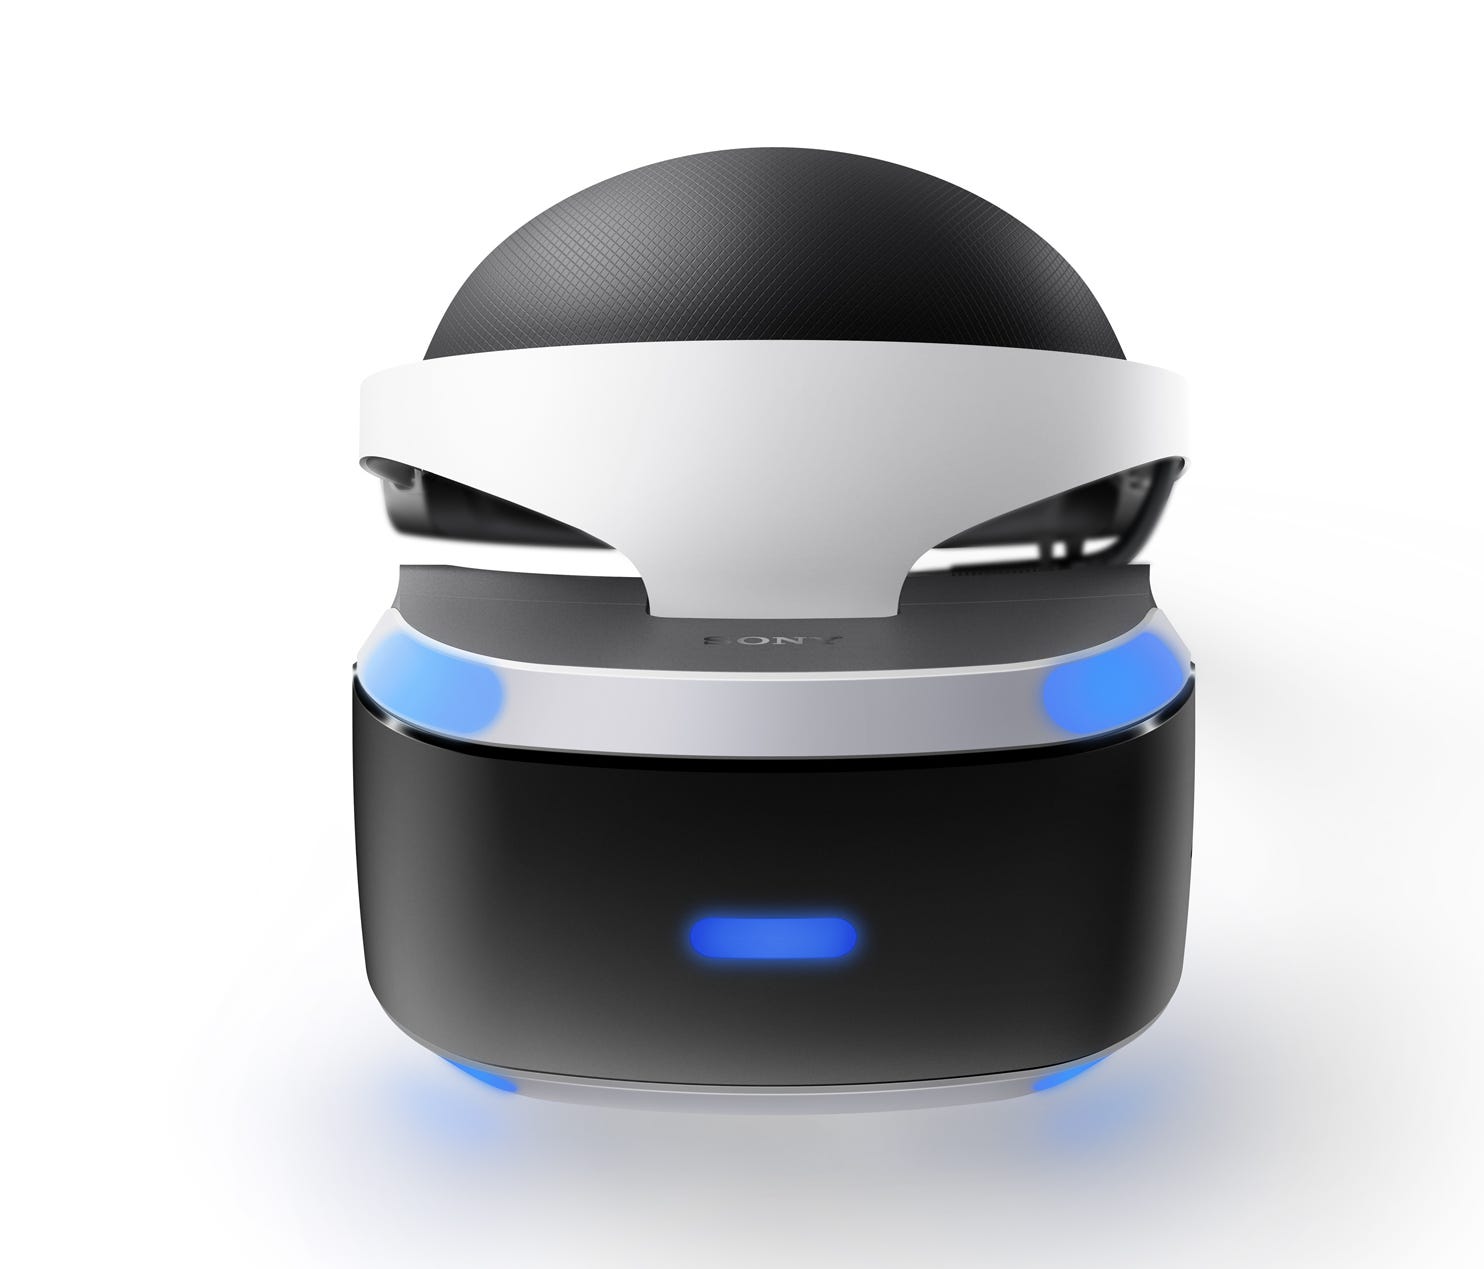 The PlayStation VR virtual reality headset.